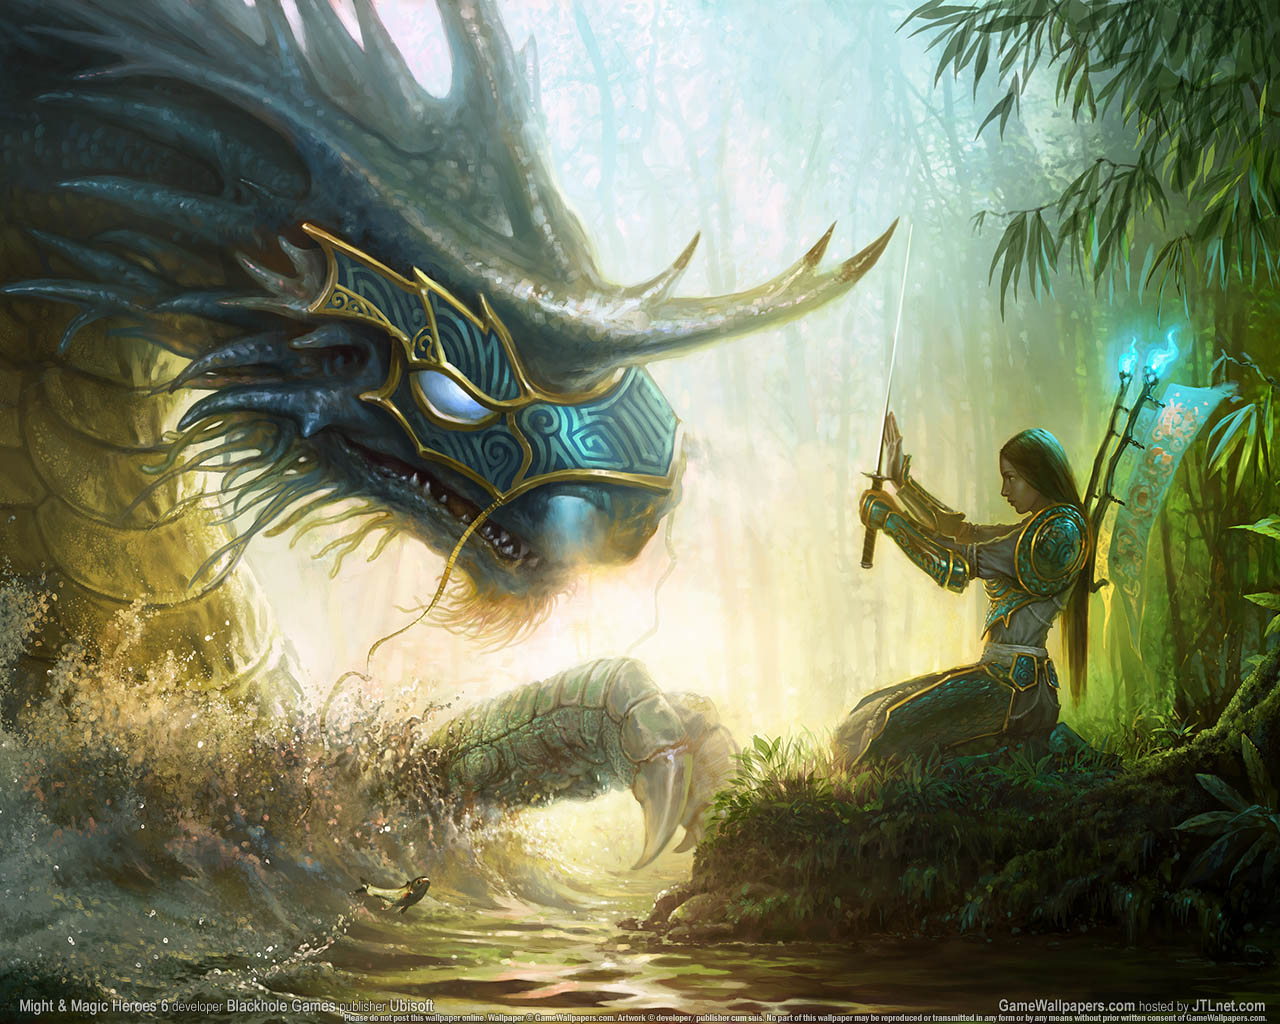 Might & Magic Heroes 6 achtergrond 06 1280x1024